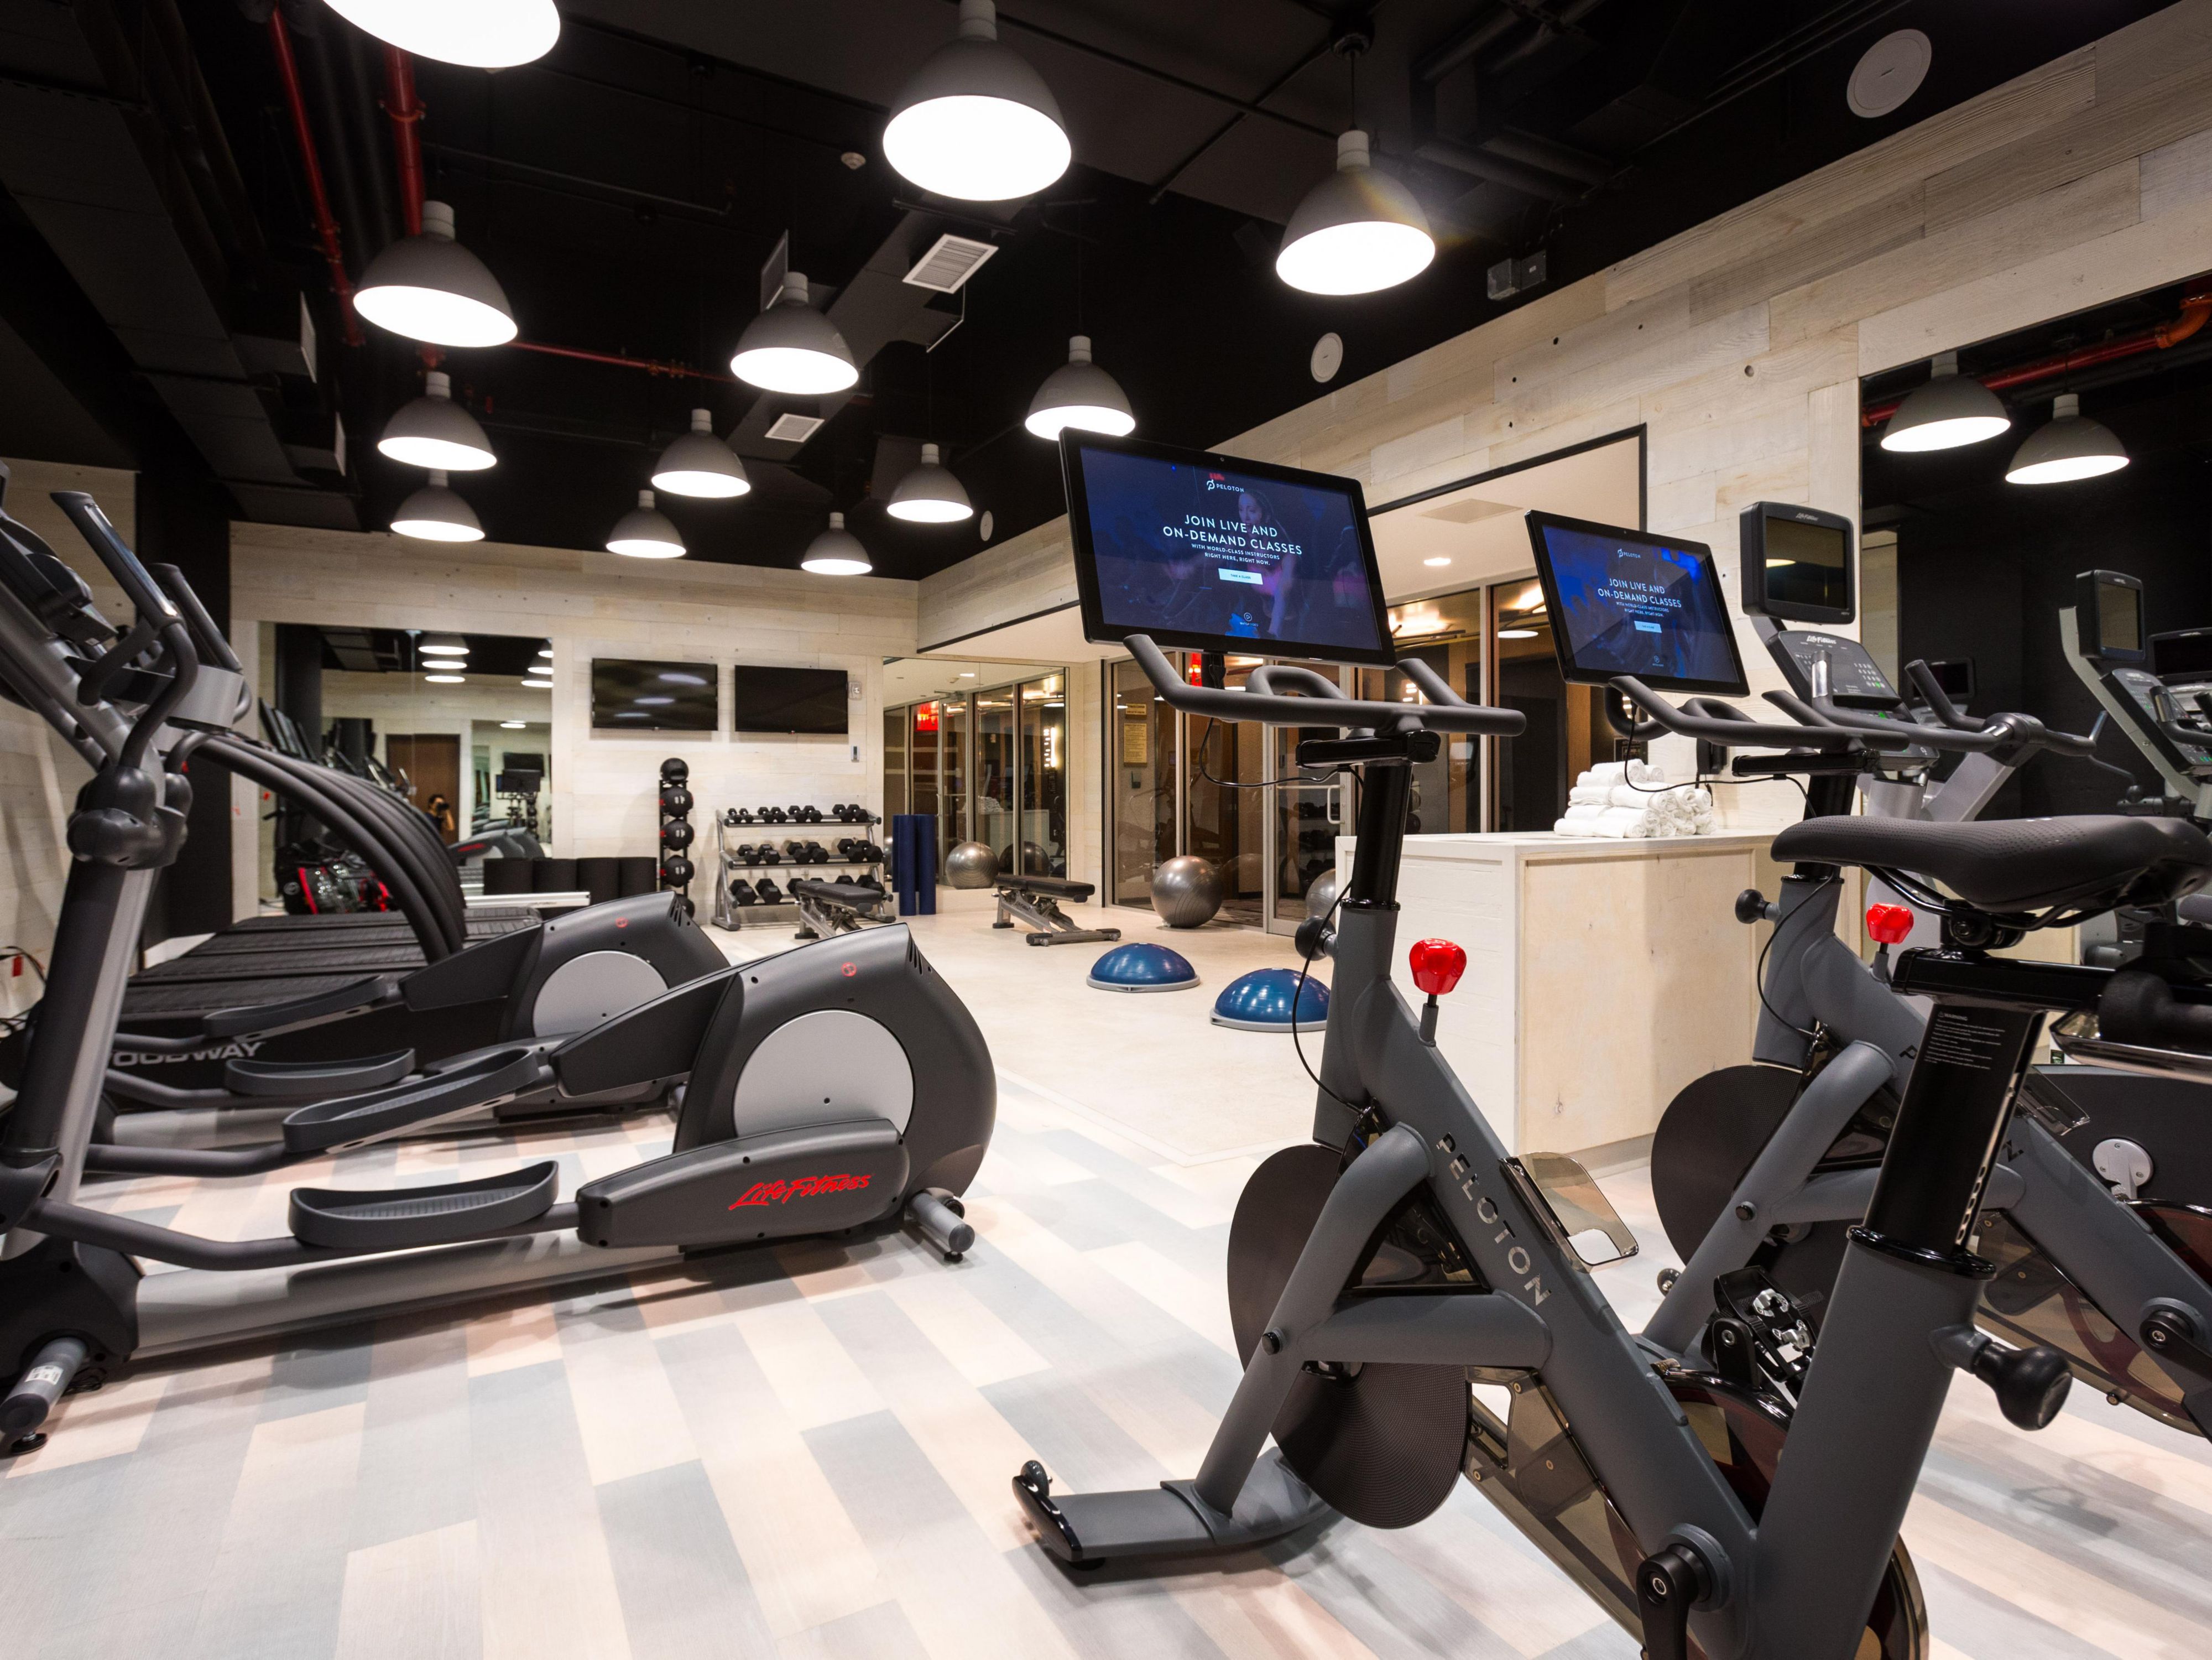 Don't let travel slow you down, our fitness center boasts Peloton Bikes with unlimited live and streaming instructor led classes, Woodway Treadmills for the ultimate running experience, free weights, yoga equipment and much more.  